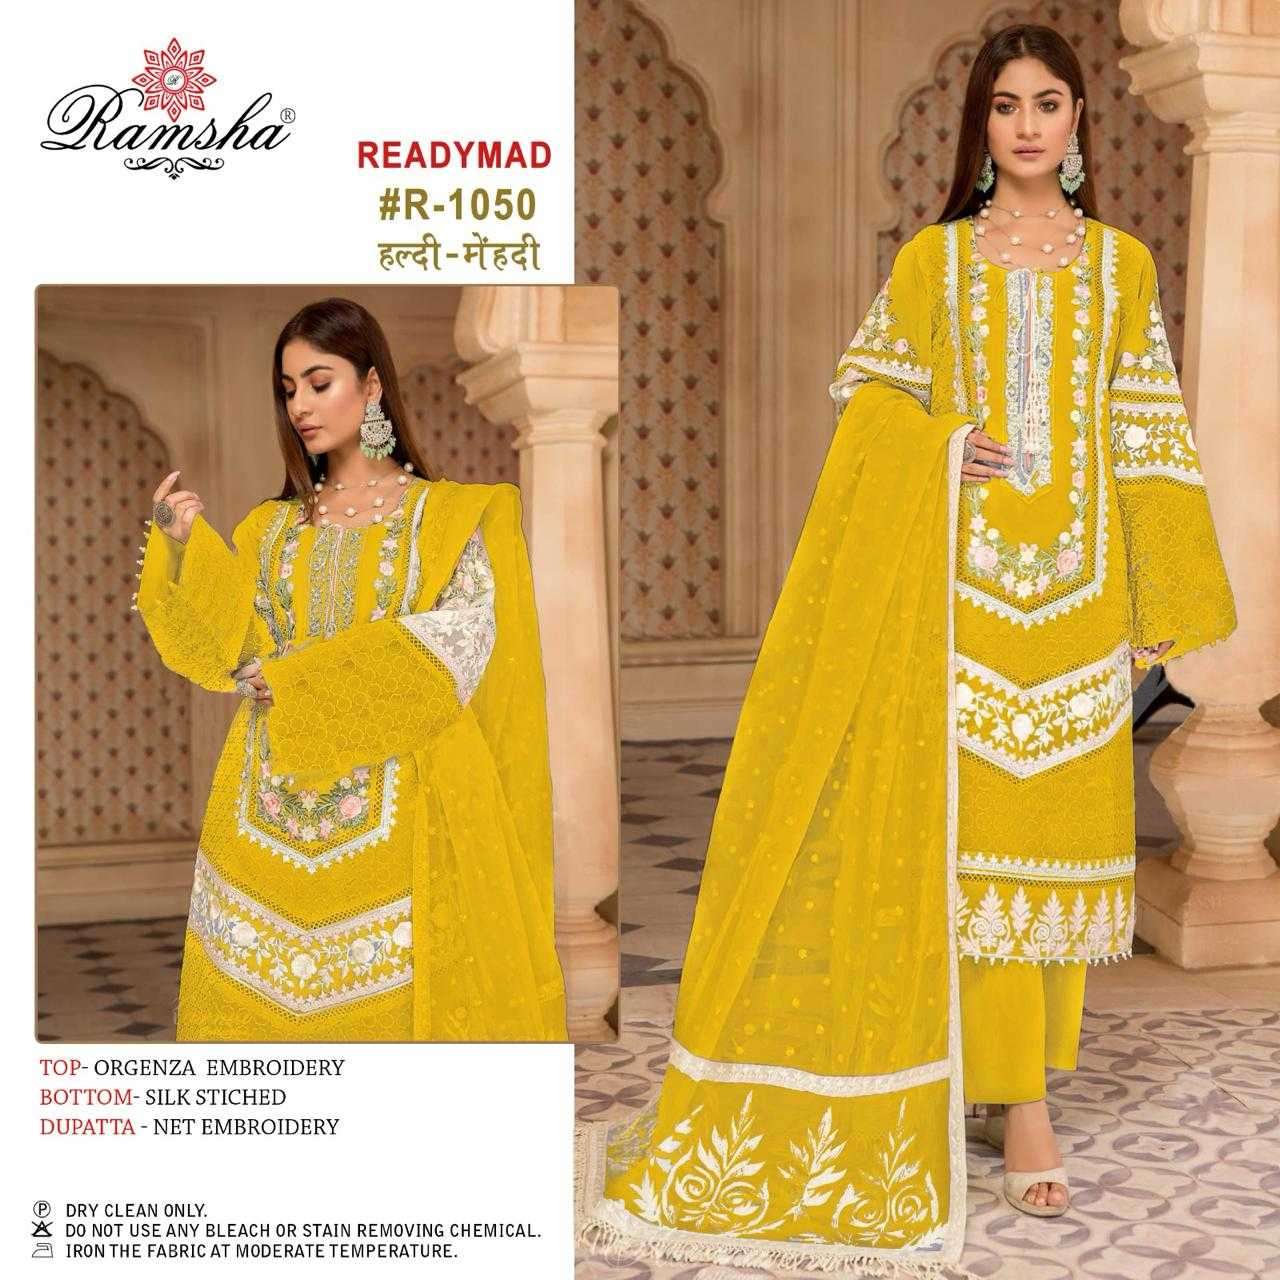 ramsha R-1050 organza embroidery readymade suit 